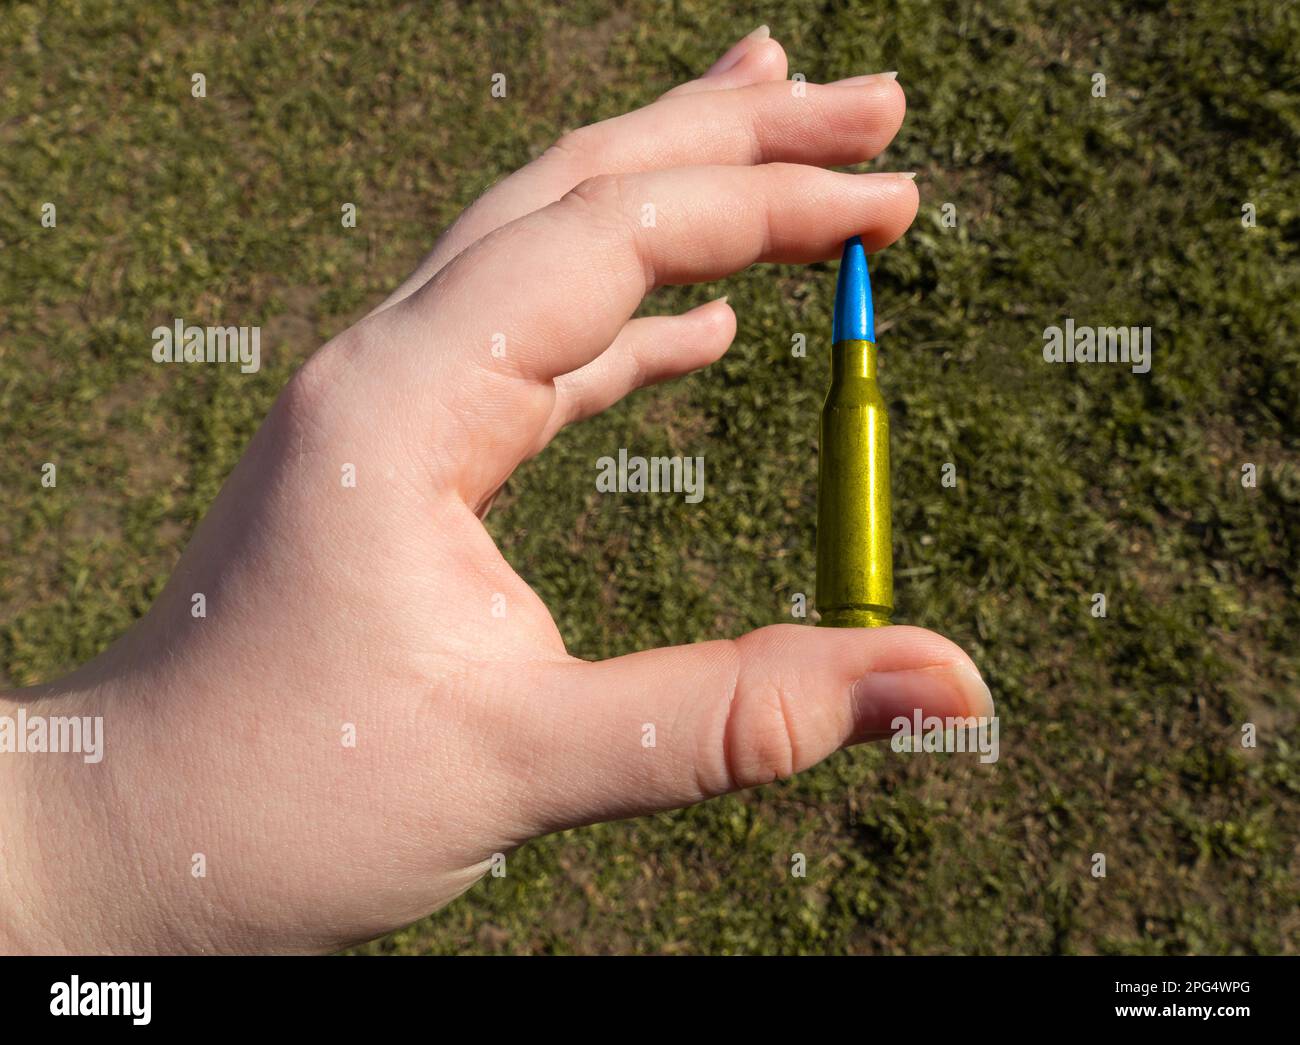 Yellow-blue rifle cartridge in hand against the background of green grass (national symbols of Ukraine). The concept of military support for Ukraine Stock Photo